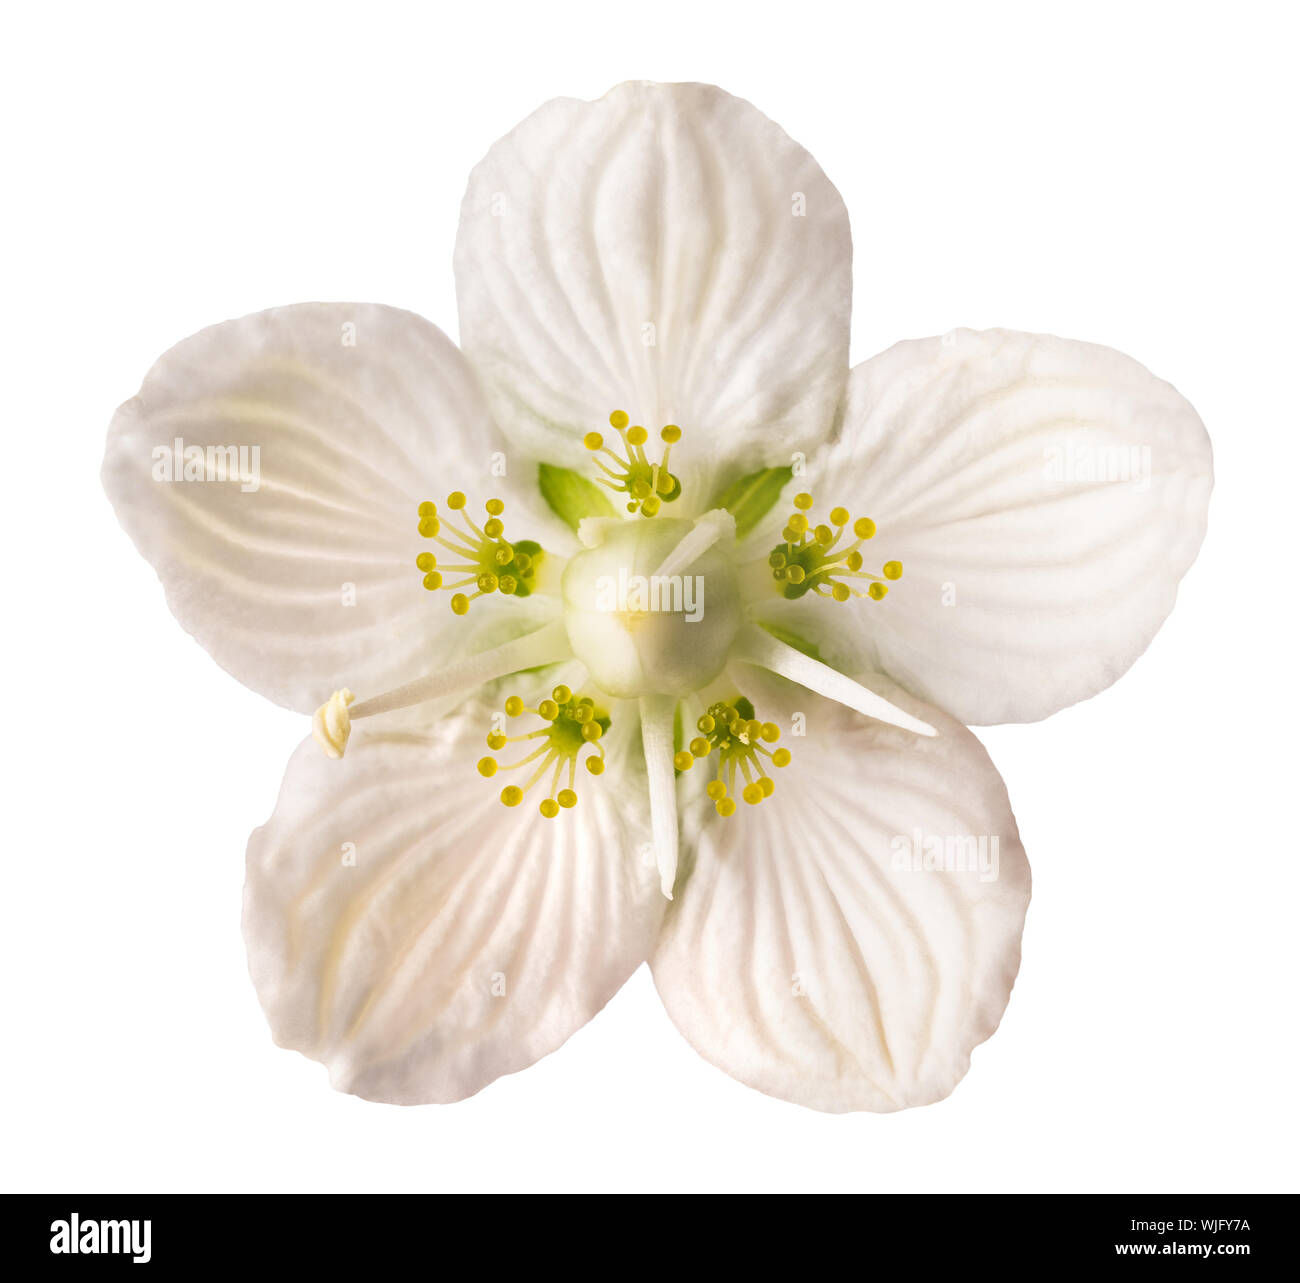 Parnassia palustris flower isolated on white background Banque D'Images